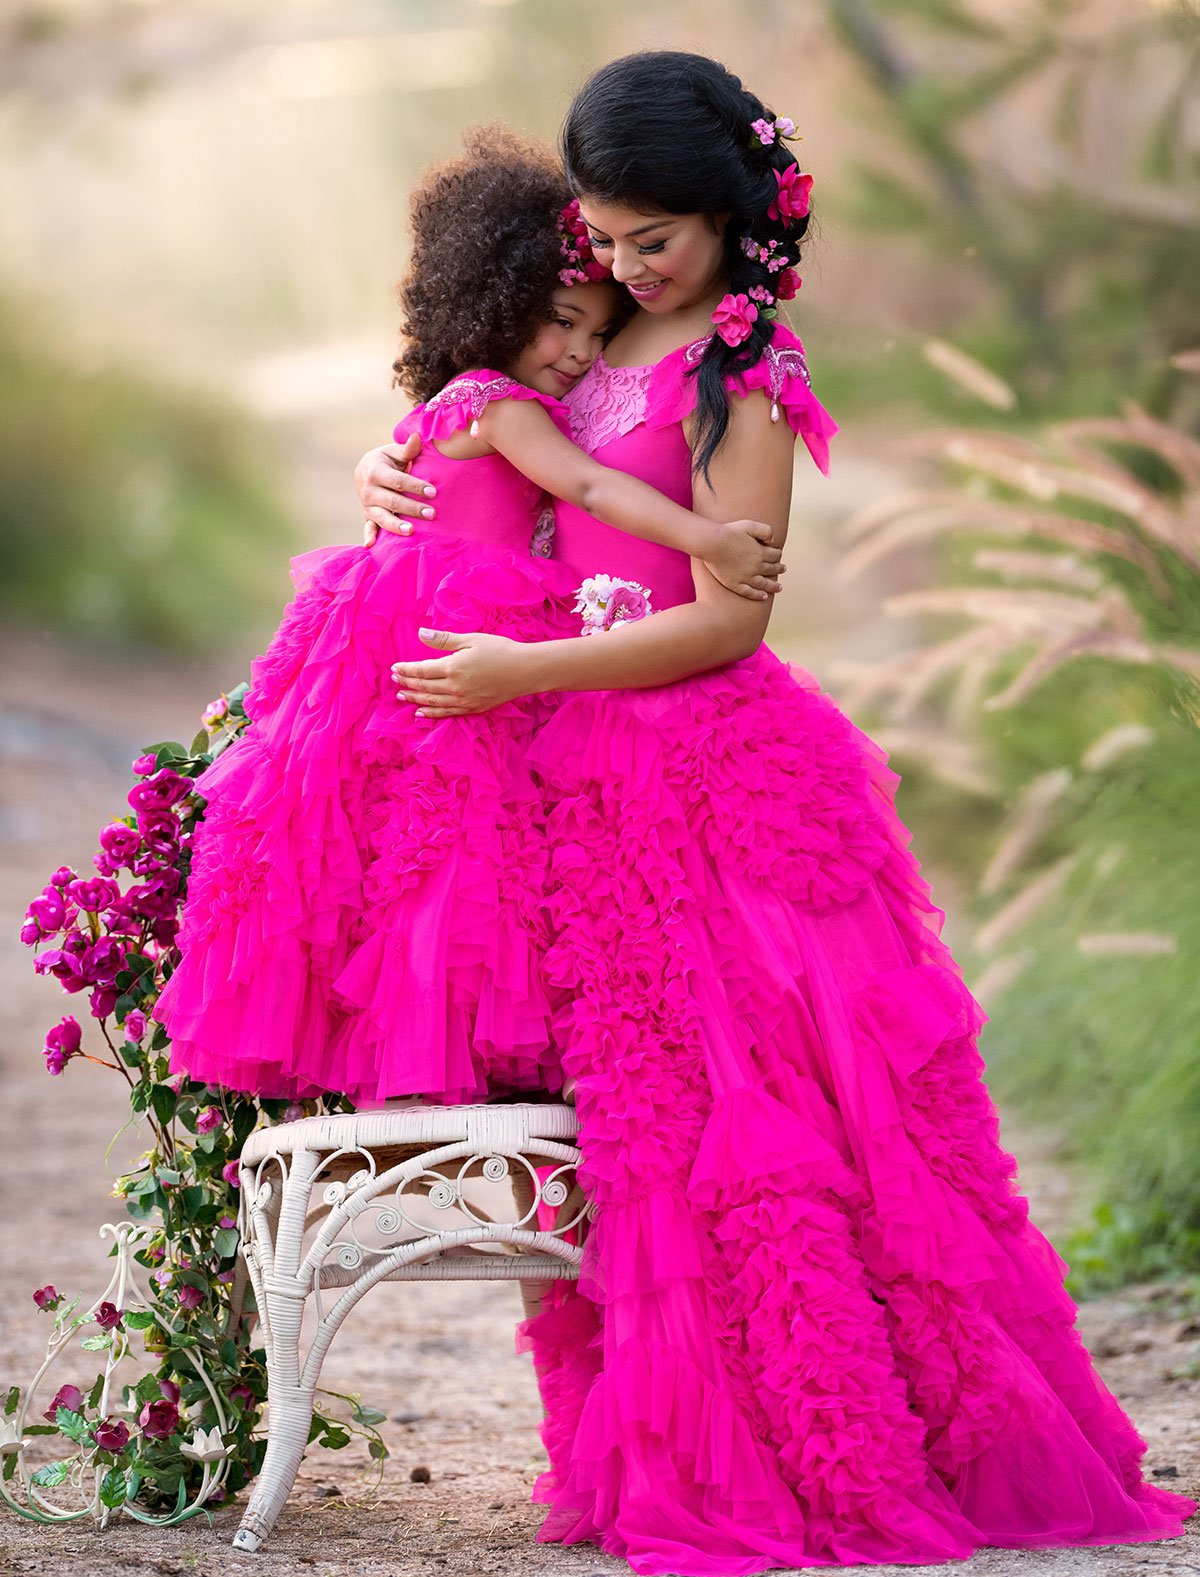 Barbie gown pink wedding dress | M202054 | Barbie gowns, Dress, Gowns